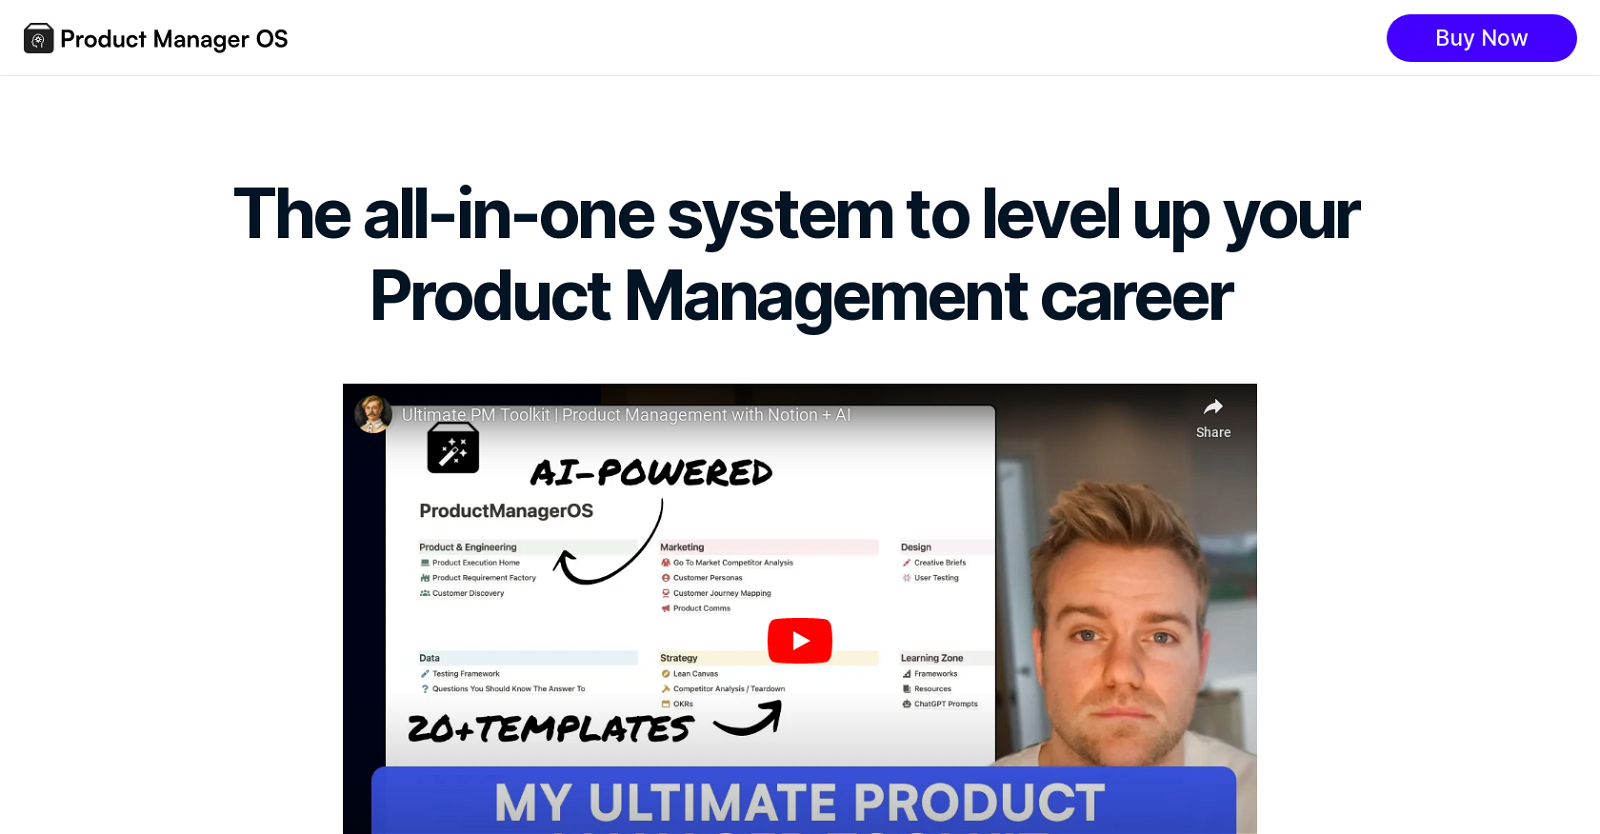 Product Manager OS website